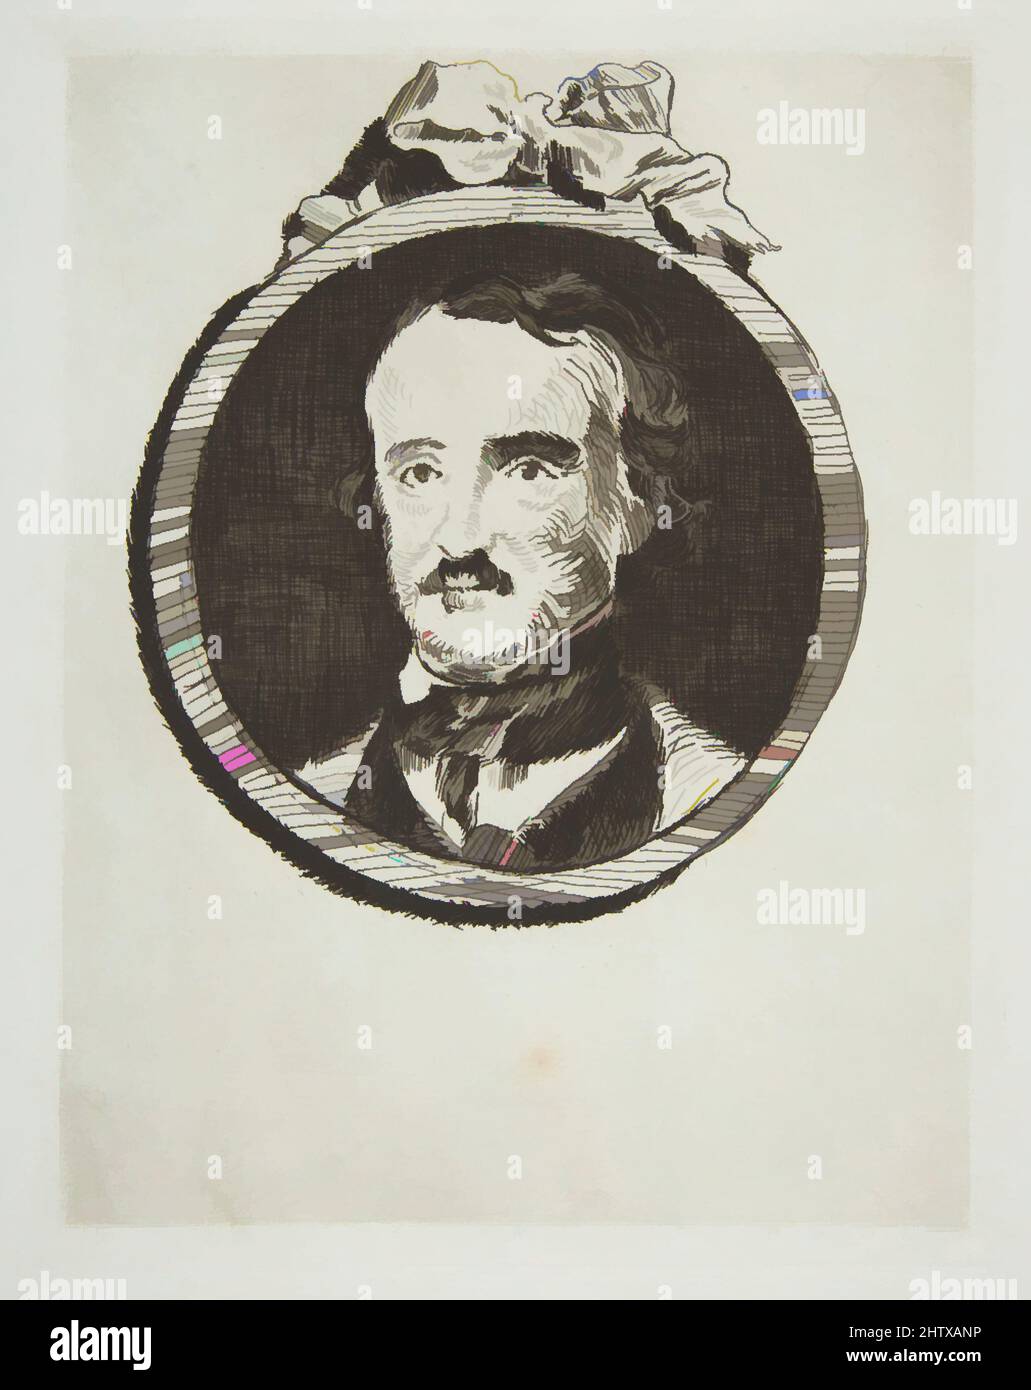 Art inspired by Portrait of Edgar Allan Poe, 1876, Etching on blue laid paper, from 1905 Strölin edition, plate: 7 1/4 x 5 3/4in. (18.4 x 14.6cm), Prints, Édouard Manet (French, Paris 1832–1883 Paris, Classic works modernized by Artotop with a splash of modernity. Shapes, color and value, eye-catching visual impact on art. Emotions through freedom of artworks in a contemporary way. A timeless message pursuing a wildly creative new direction. Artists turning to the digital medium and creating the Artotop NFT Stock Photo